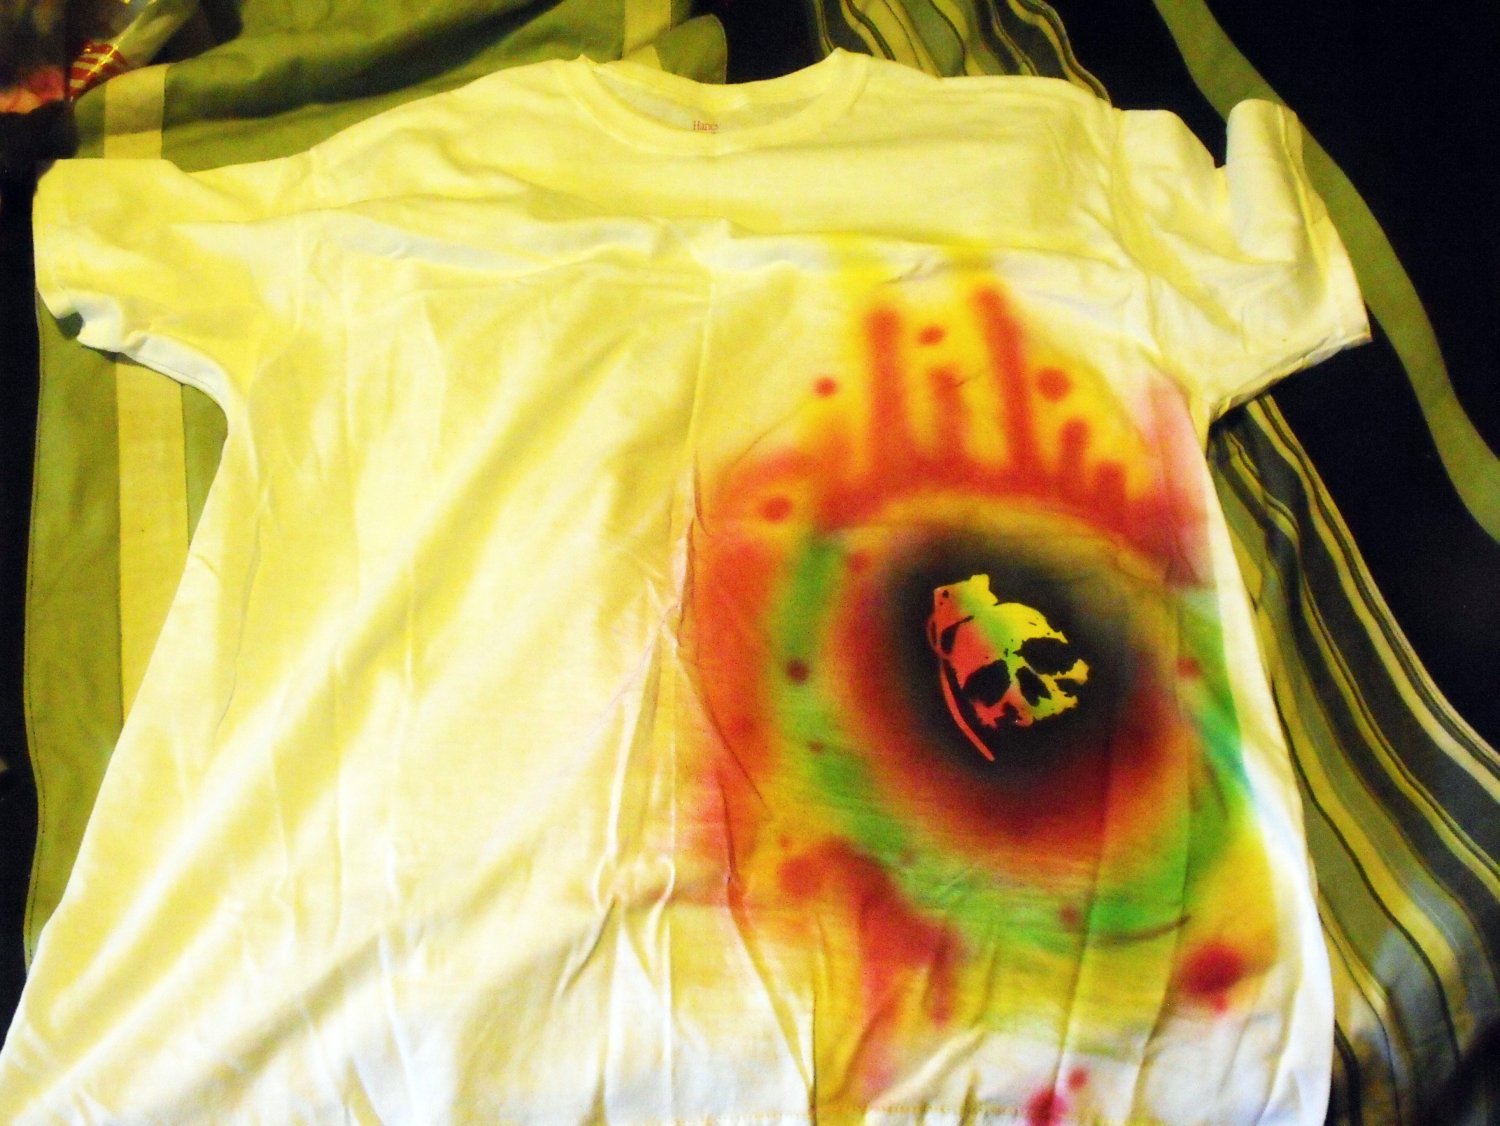 One of a kind XL air-brushed skull grenade T-shirt - prewashed and new